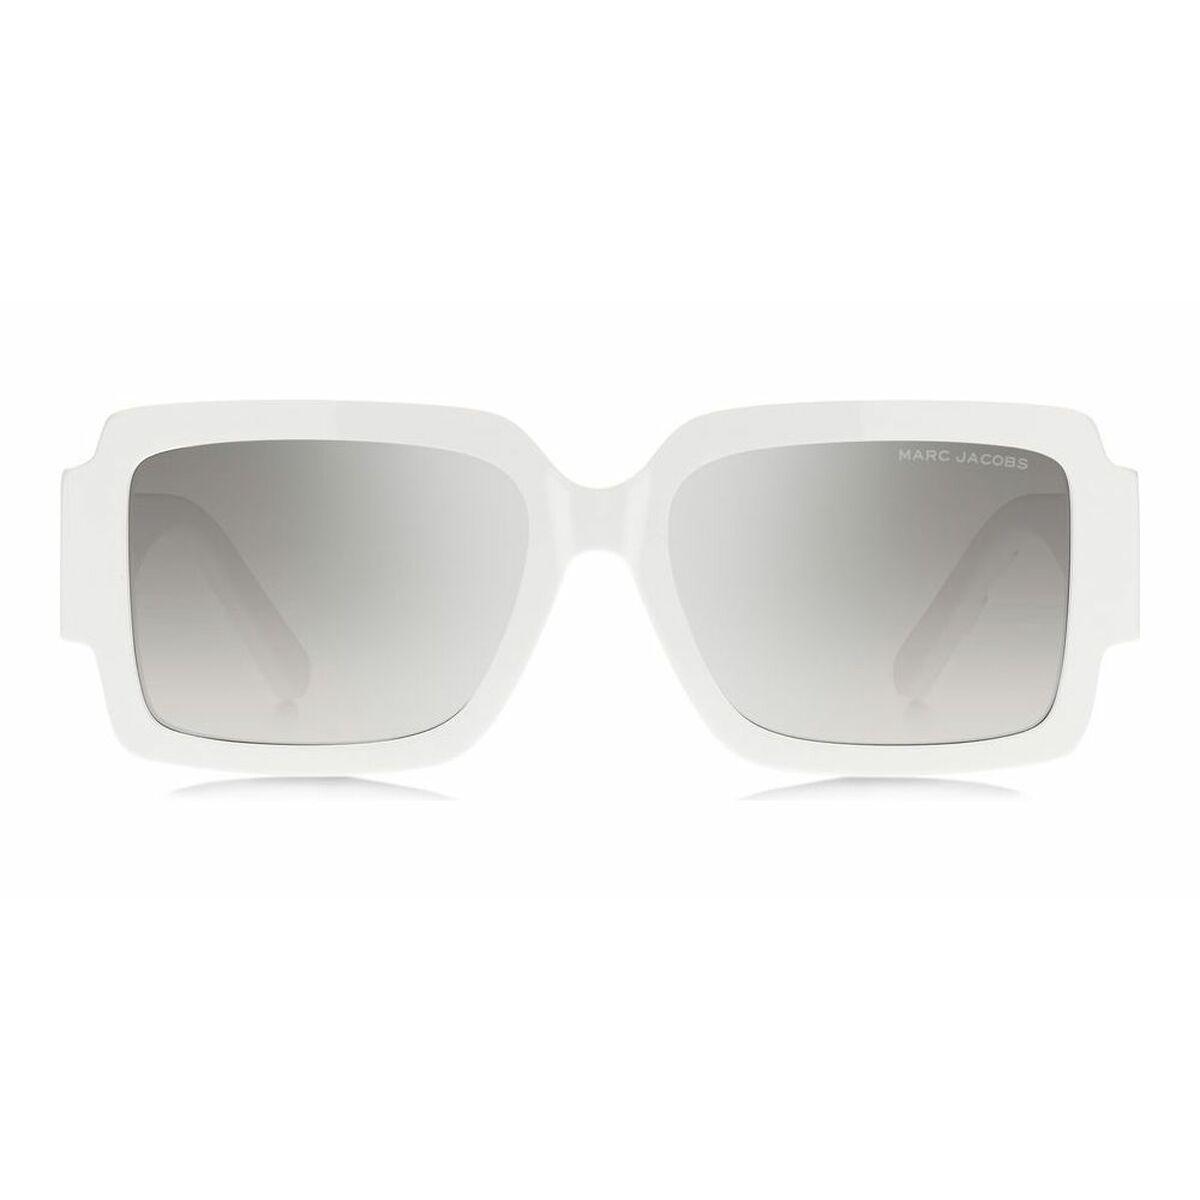 Marc Jacobs oval sunglasses in monochrome | ASOS